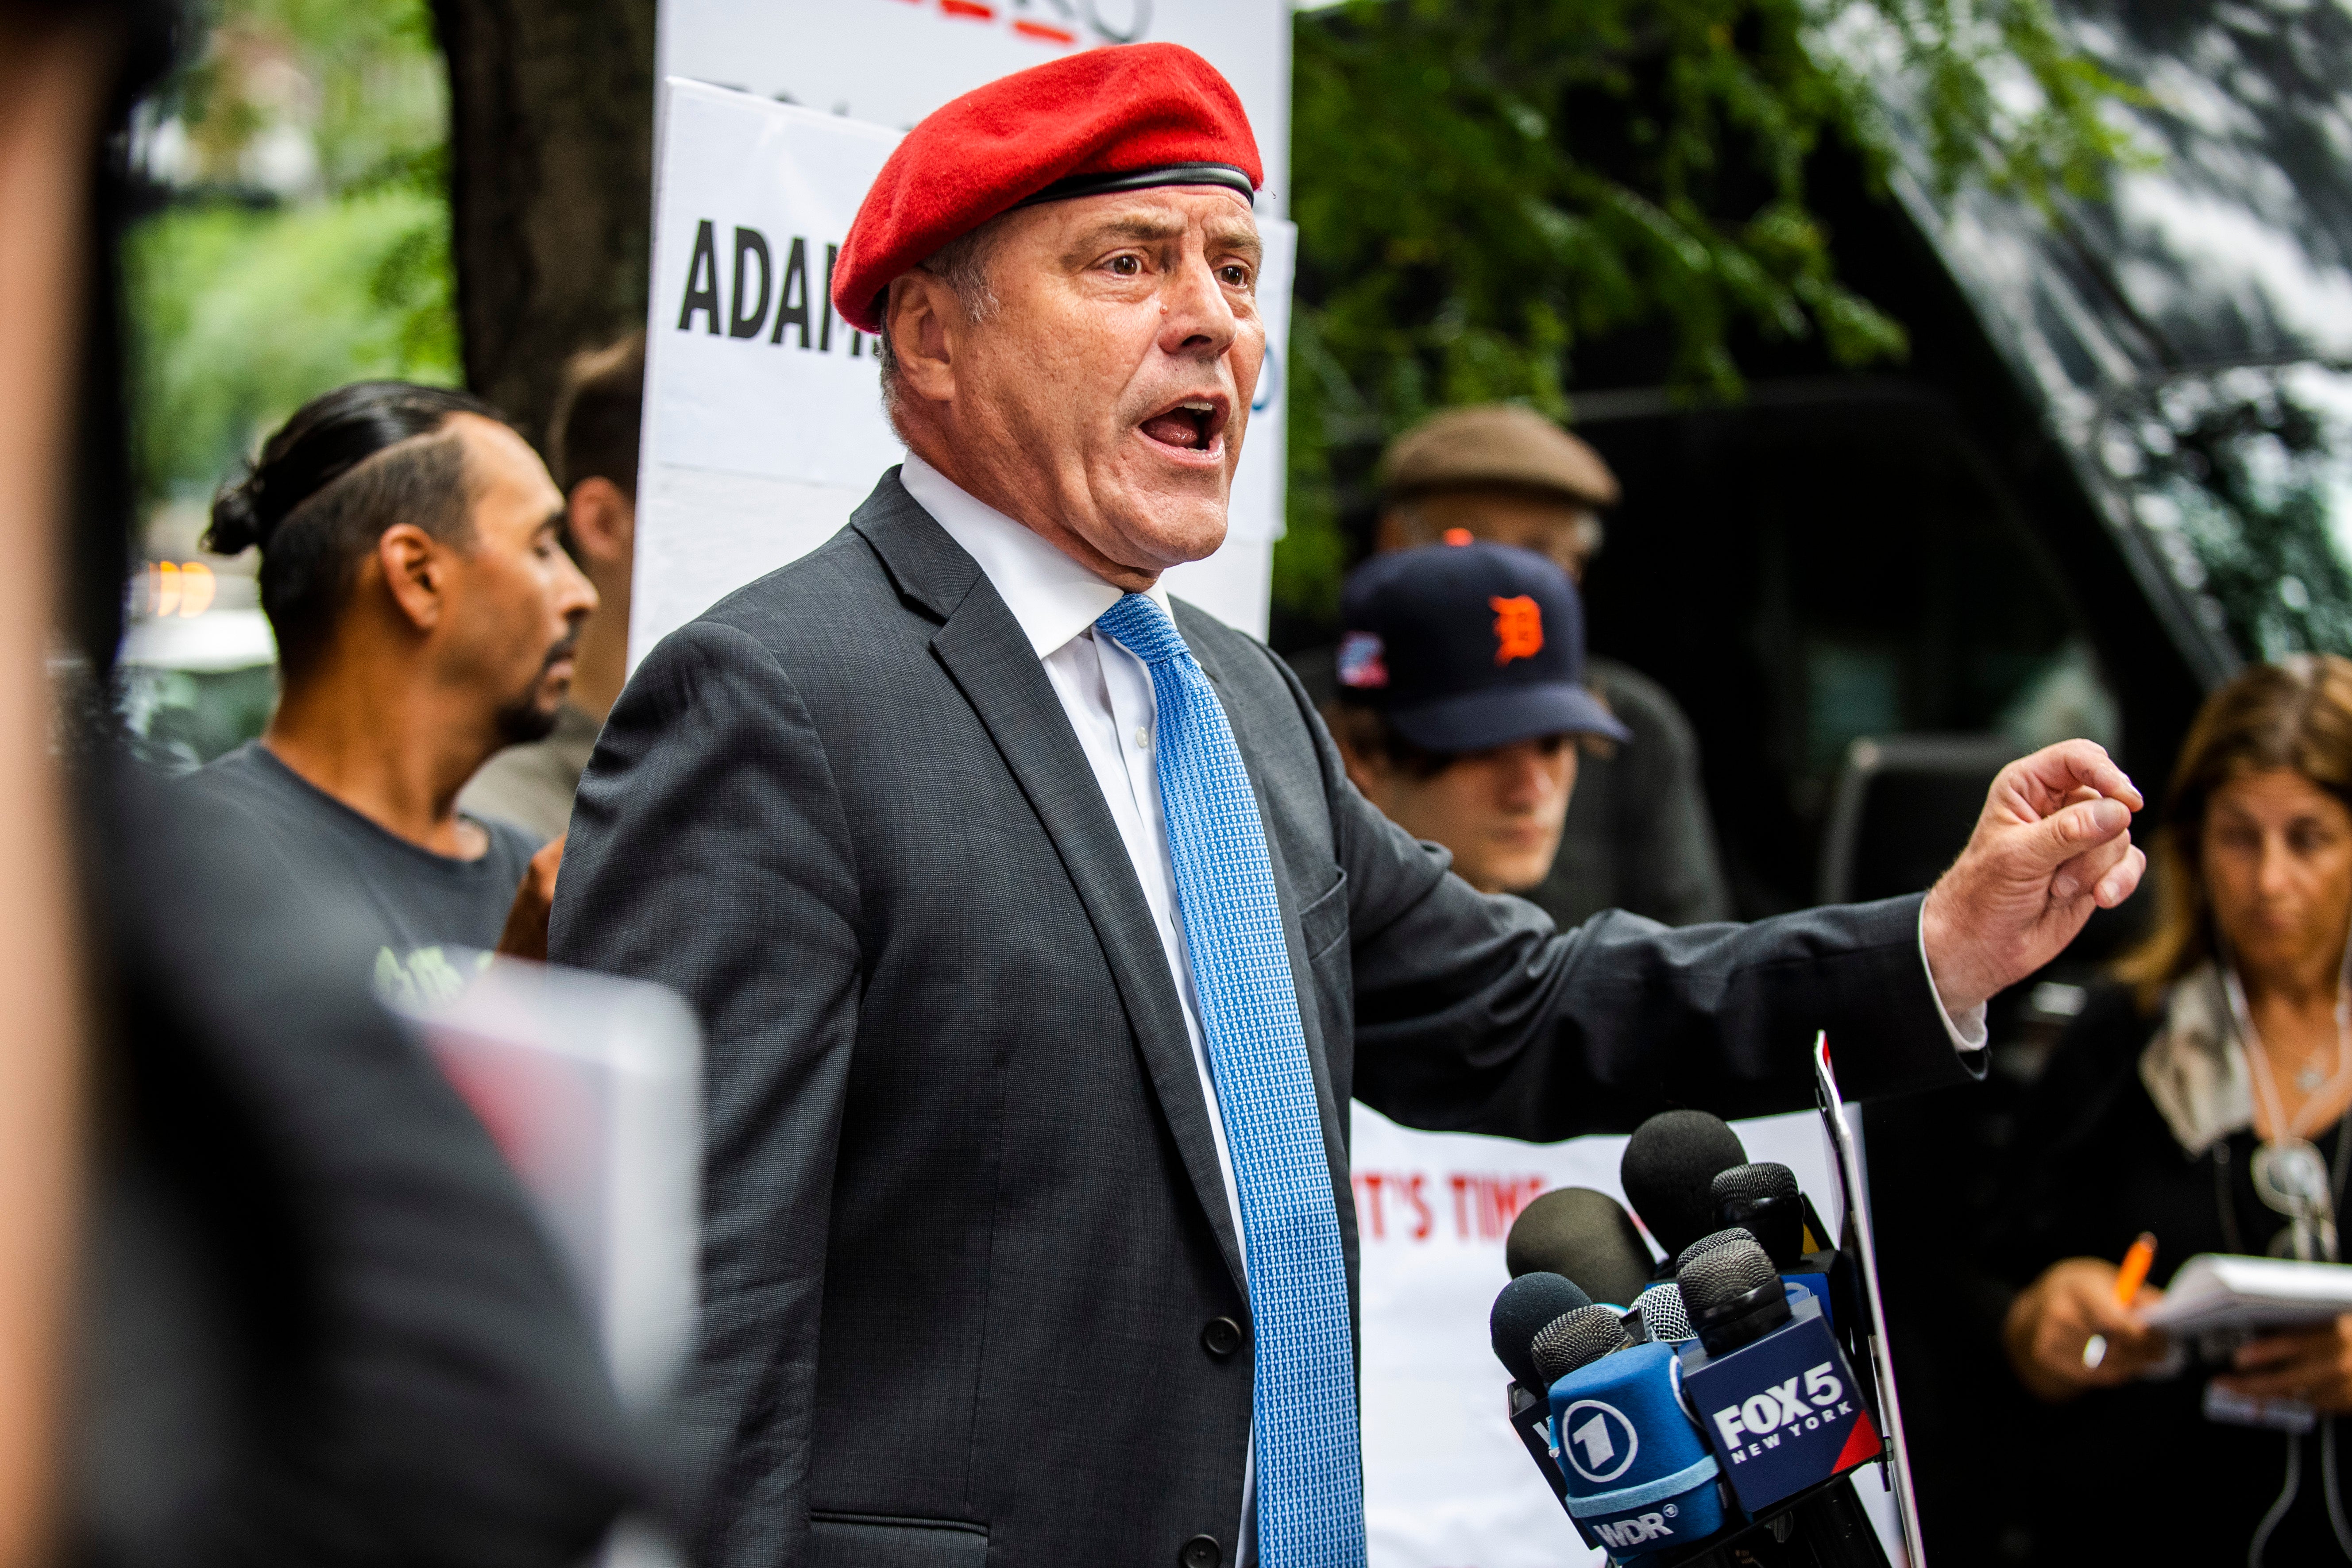 On 4 August, New York City’s Republican mayoral candidate Curtis Sliwa joined a protest demanding the resignation of Governor Andrew Cuomo, whom the Guardian Angels founder has called his ‘nemesis’.